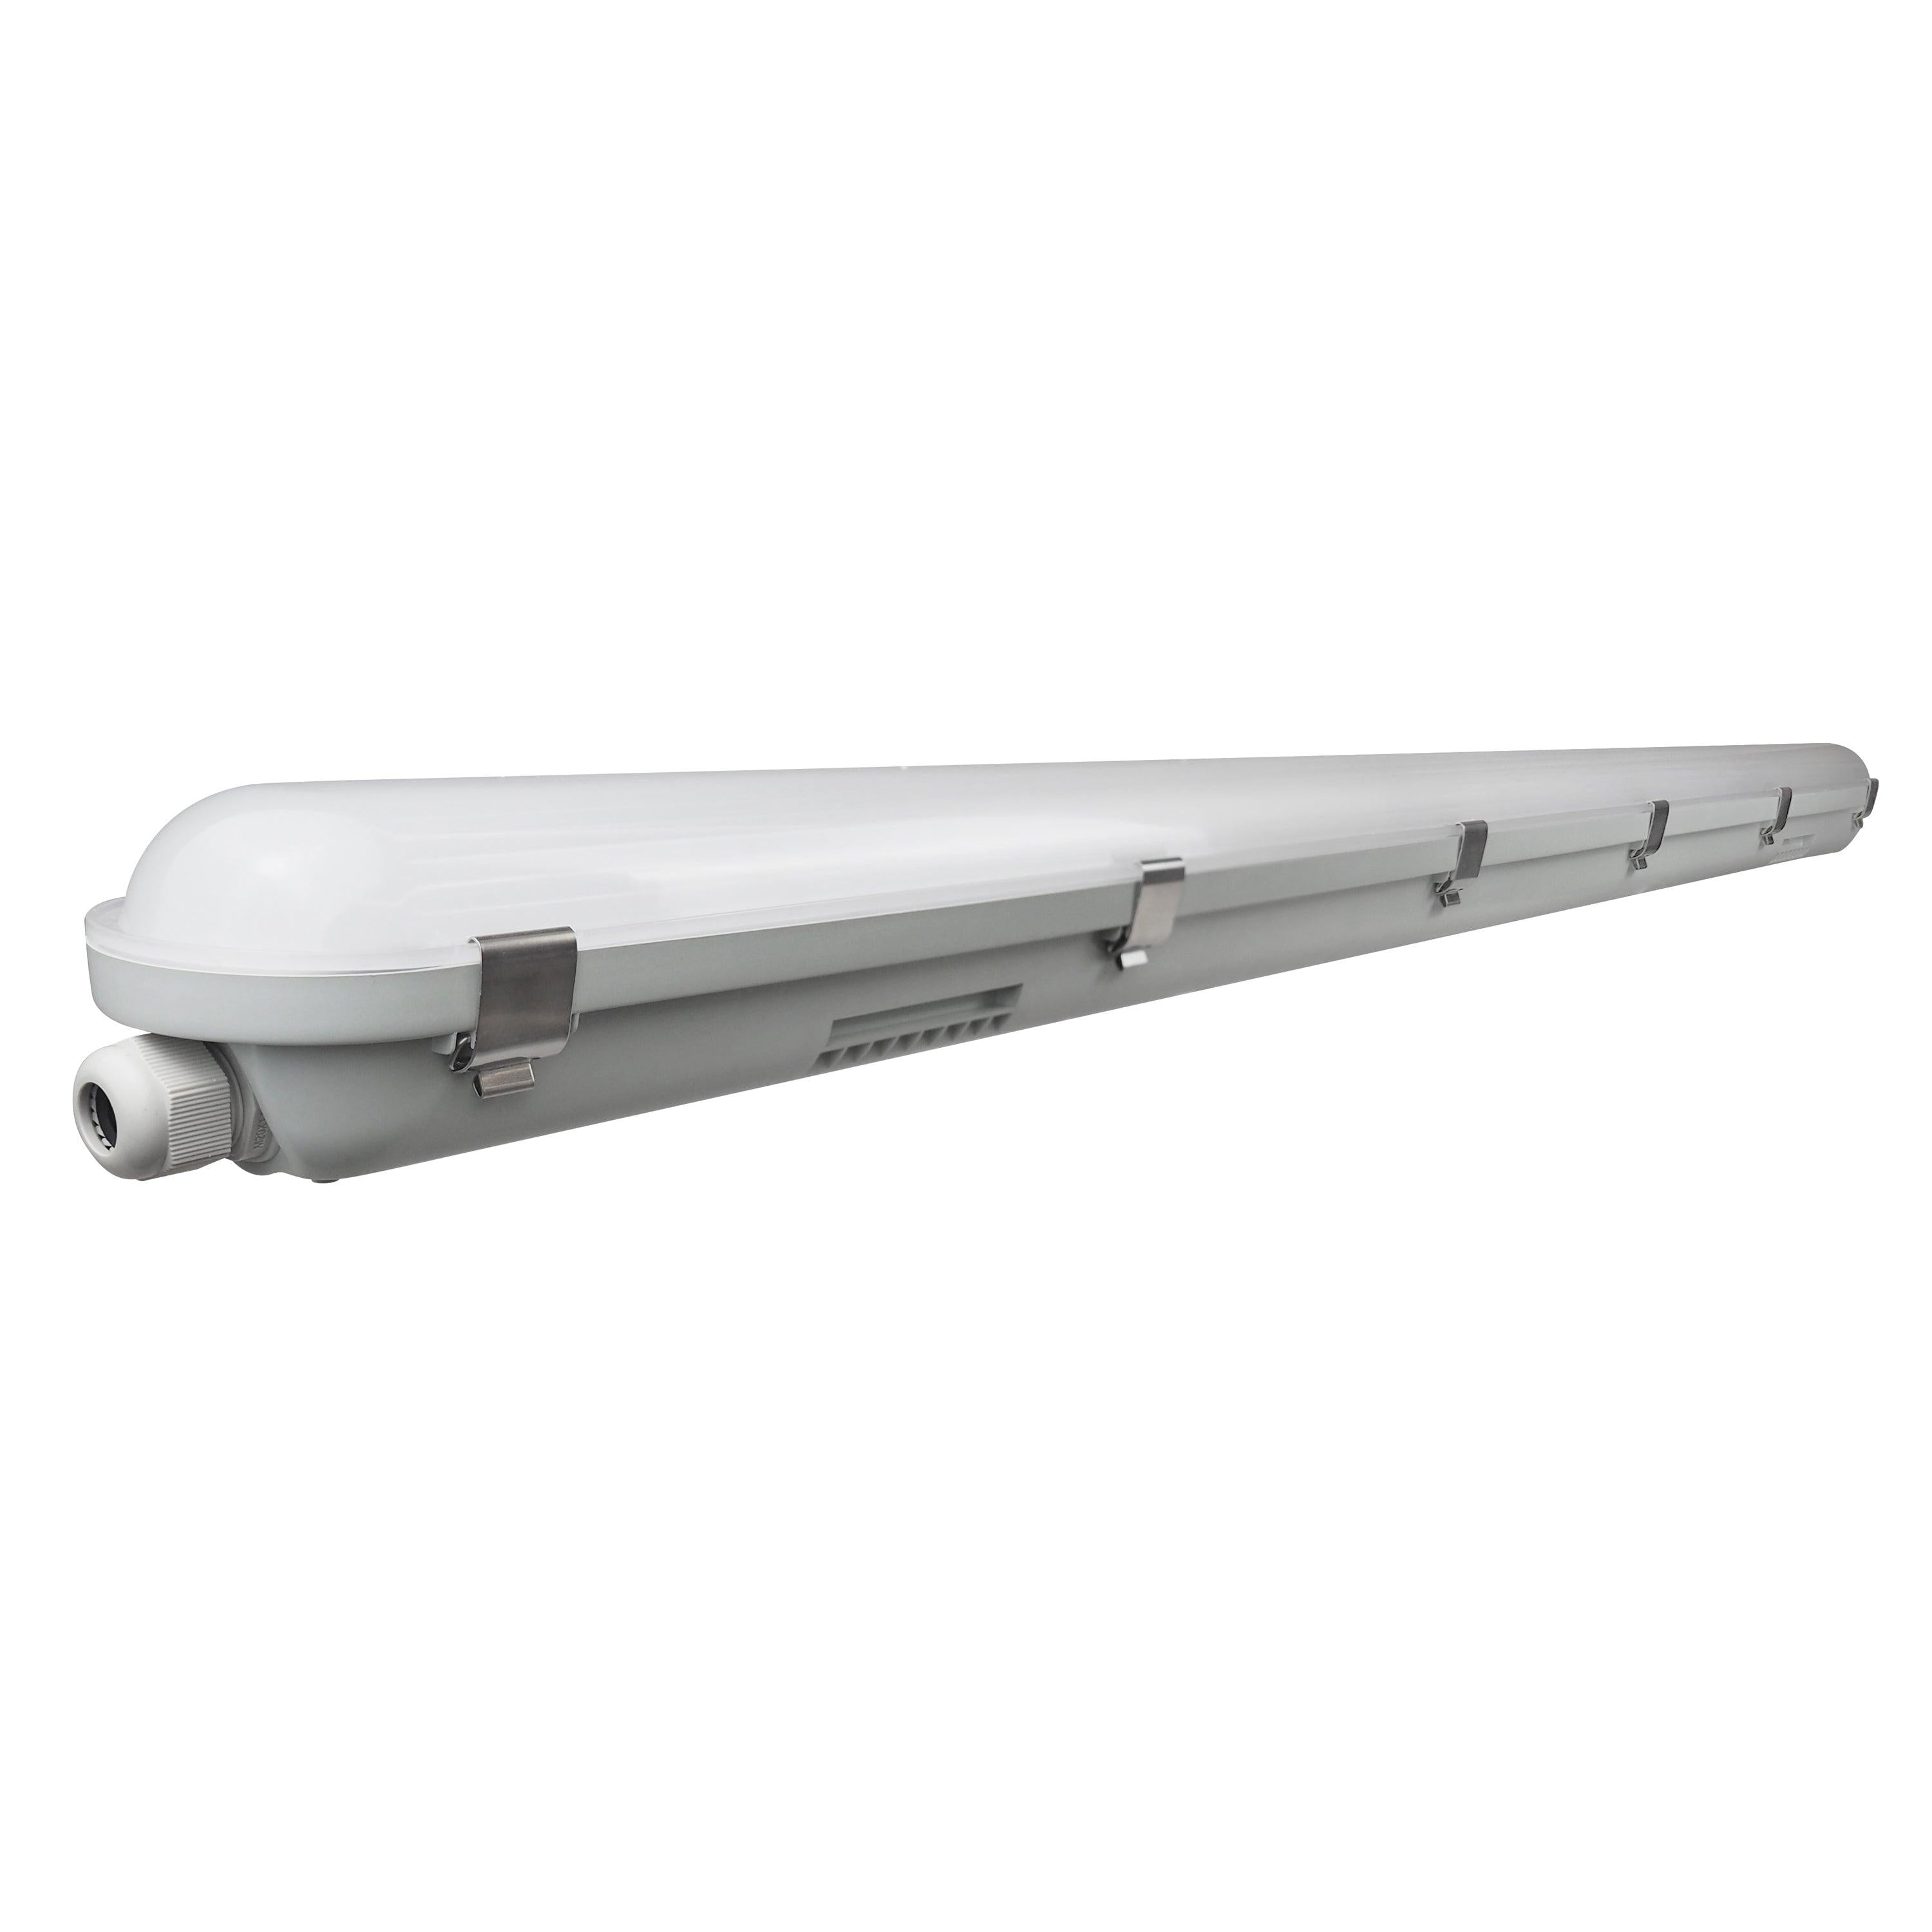 48w 5ft IP65 Triproof LED Linear Lights, 3CCT, Linkable, 7200lm (150lm/w), 5 Year Warranty, Platinum-PD Range - Clear Sky Distributers  (7336799633595)